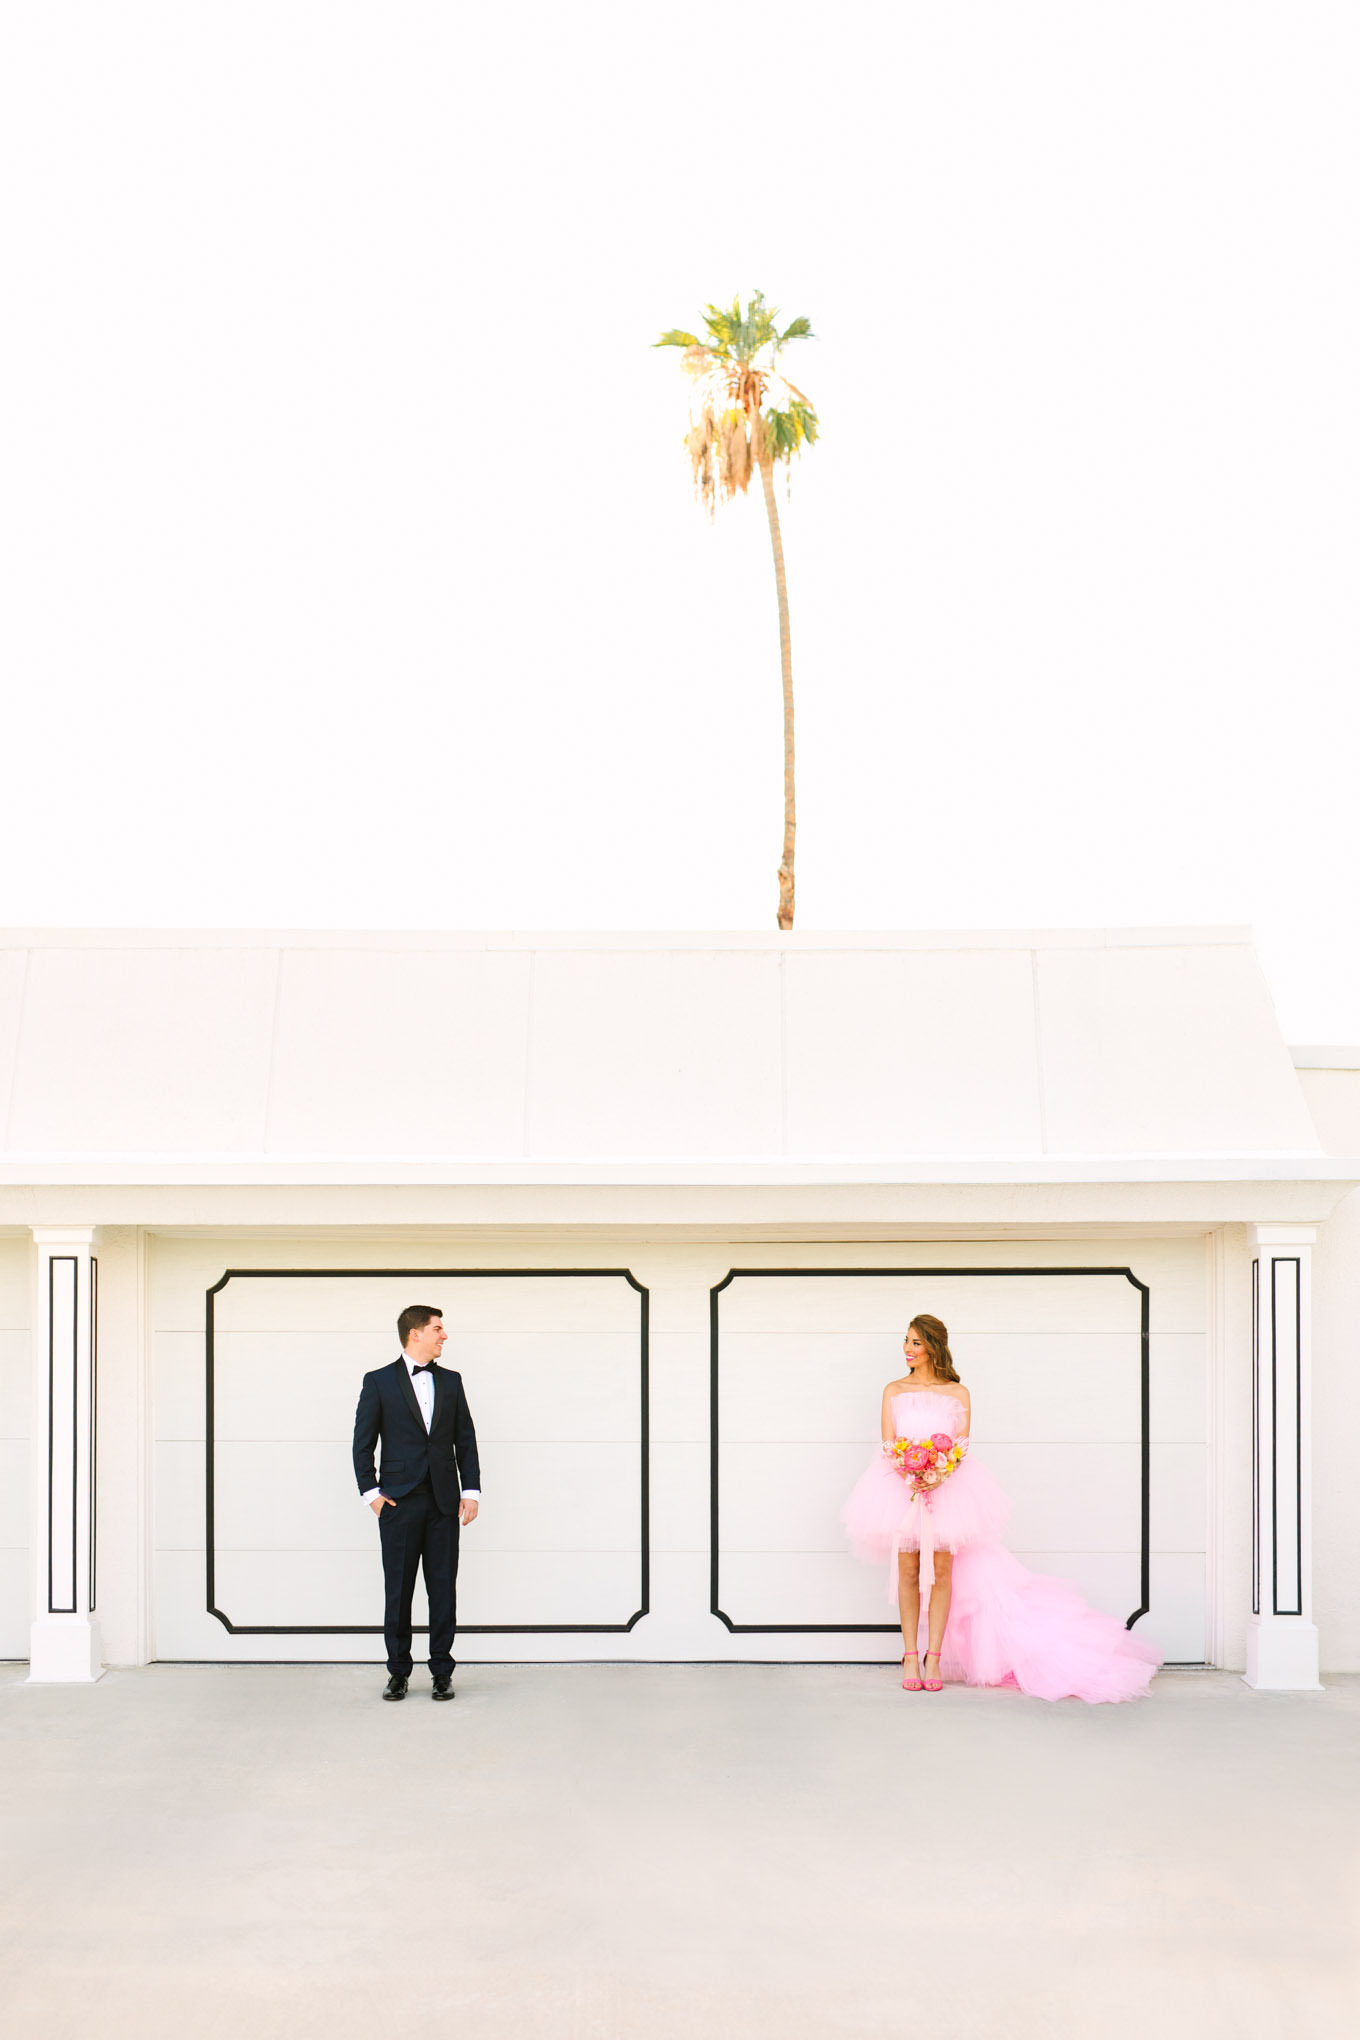 Palm Springs pink dress elopement | Engagement, elopement, and wedding photography roundup of Mary Costa’s favorite images from 2020 | Colorful and elevated photography for fun-loving couples in Southern California | #2020wedding #elopement #weddingphoto #weddingphotography   Source: Mary Costa Photography | Los Angeles